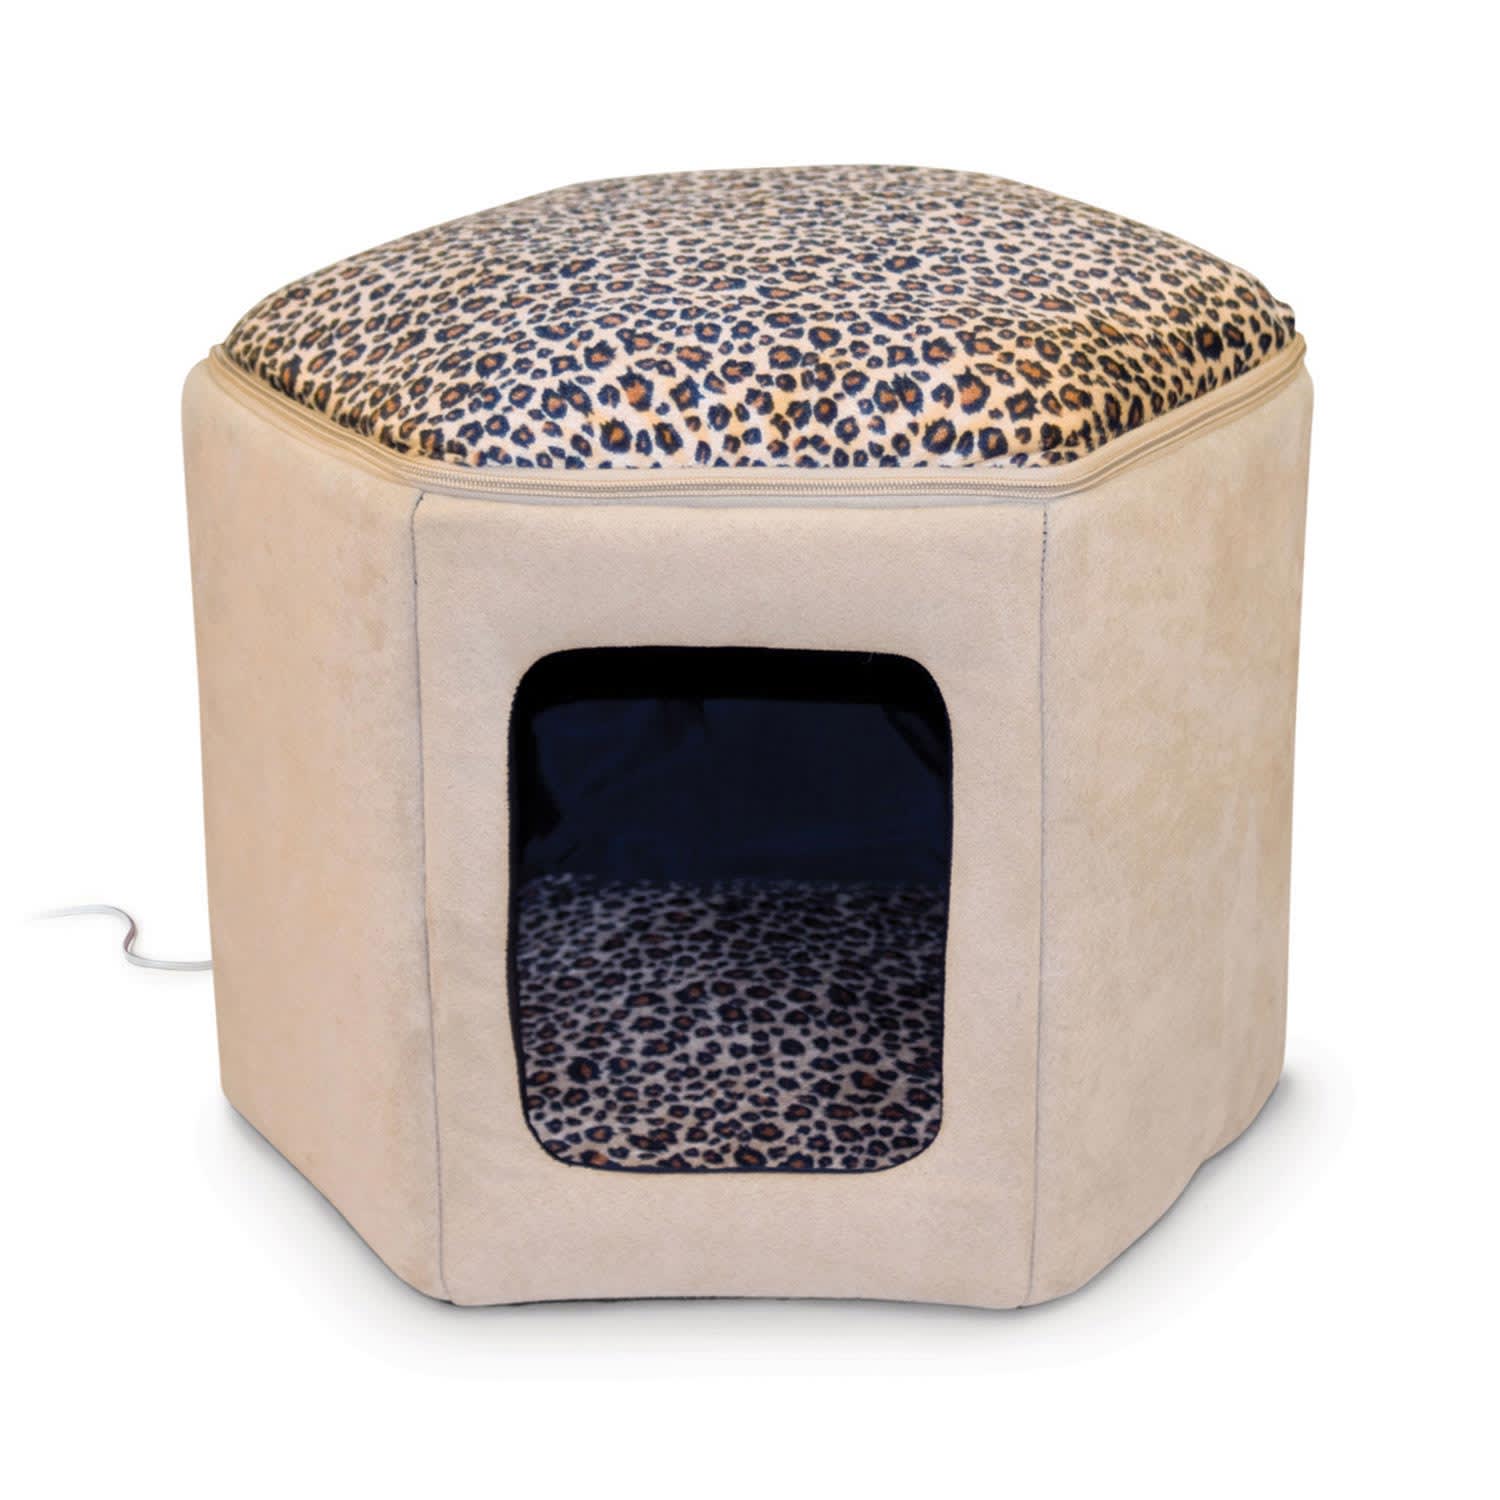 Photos - Bed & Furniture K&H Thermo-Kitty Sleep House Heated Cat Bed in Tan and Leopard Print, 